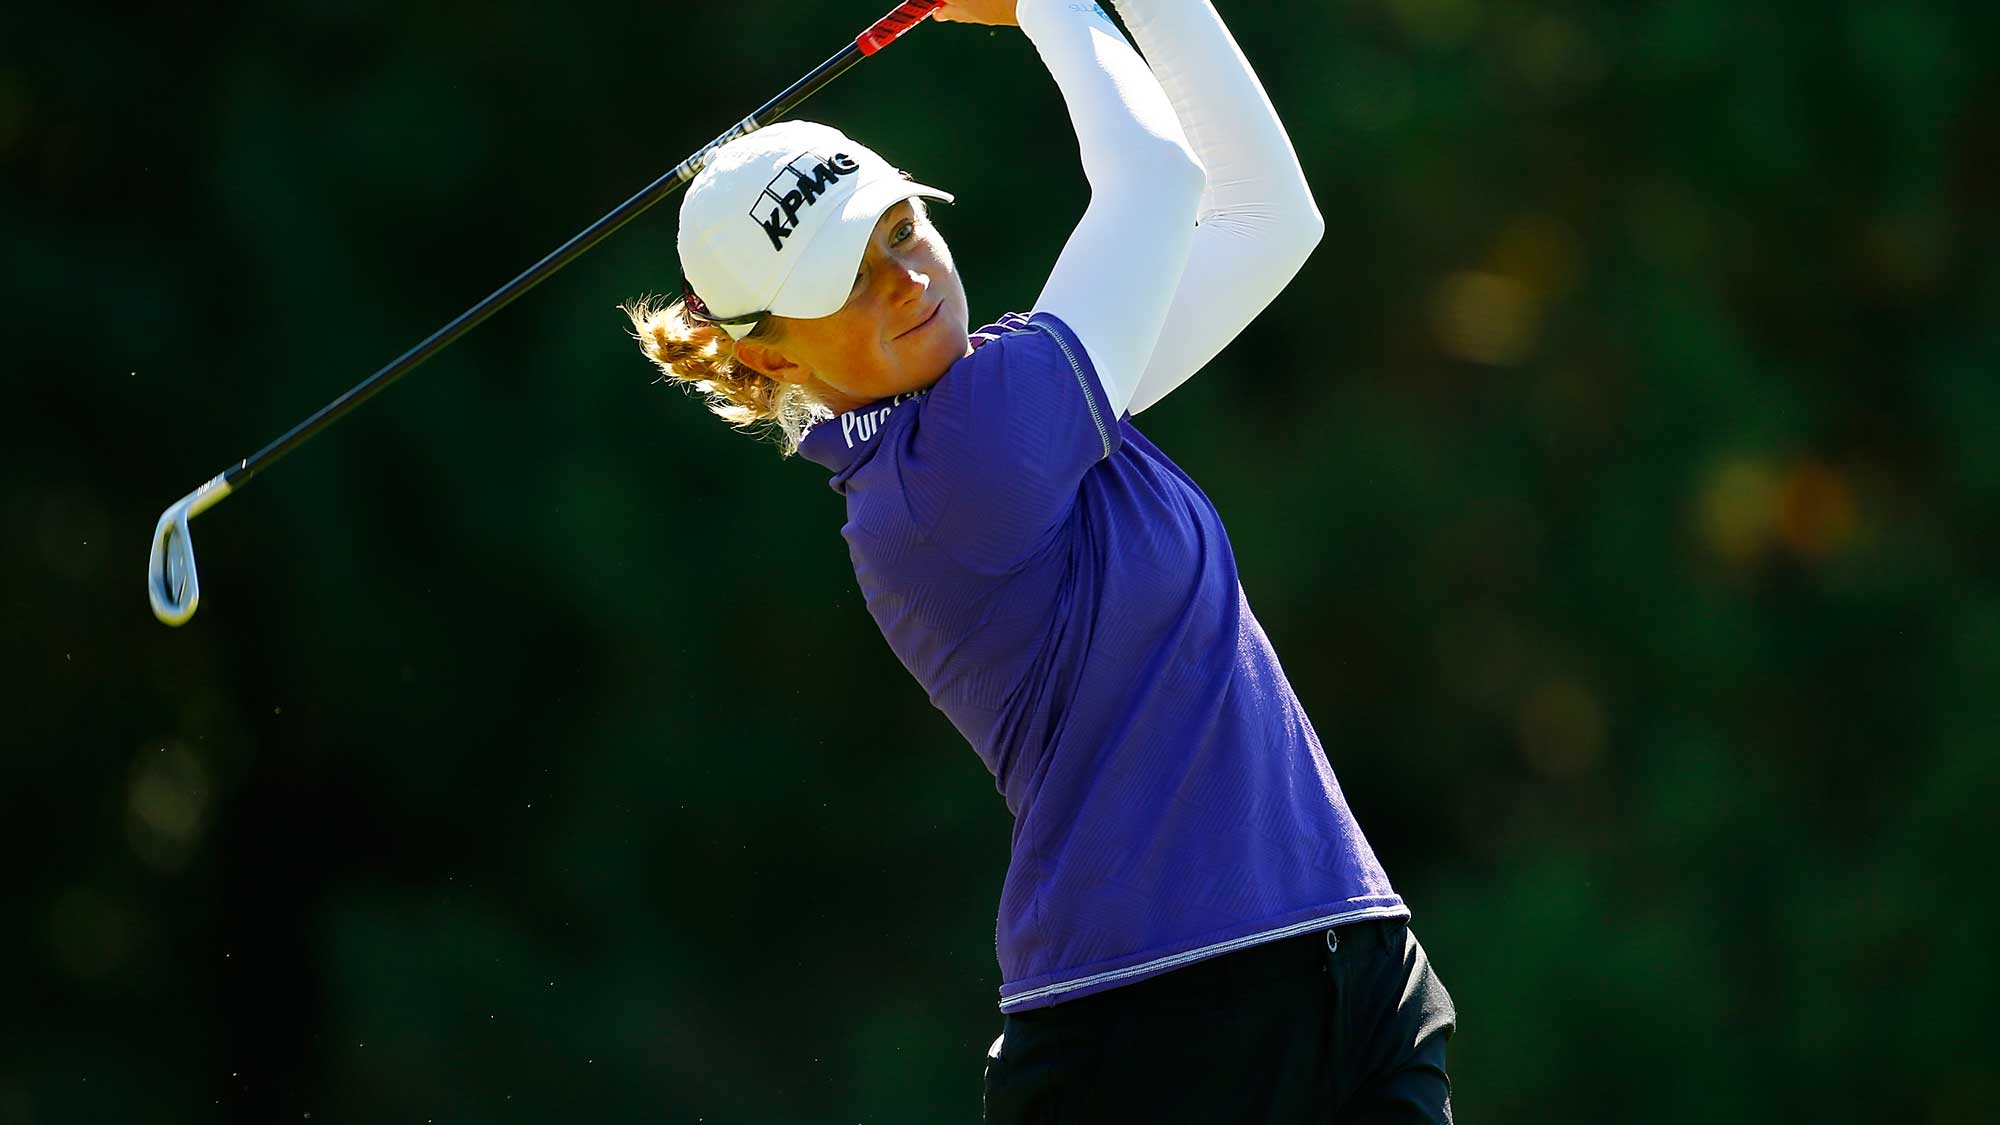 Stacy Lewis tees off on the 2nd hole during the second round of the LPGA Cambia Portland Classic